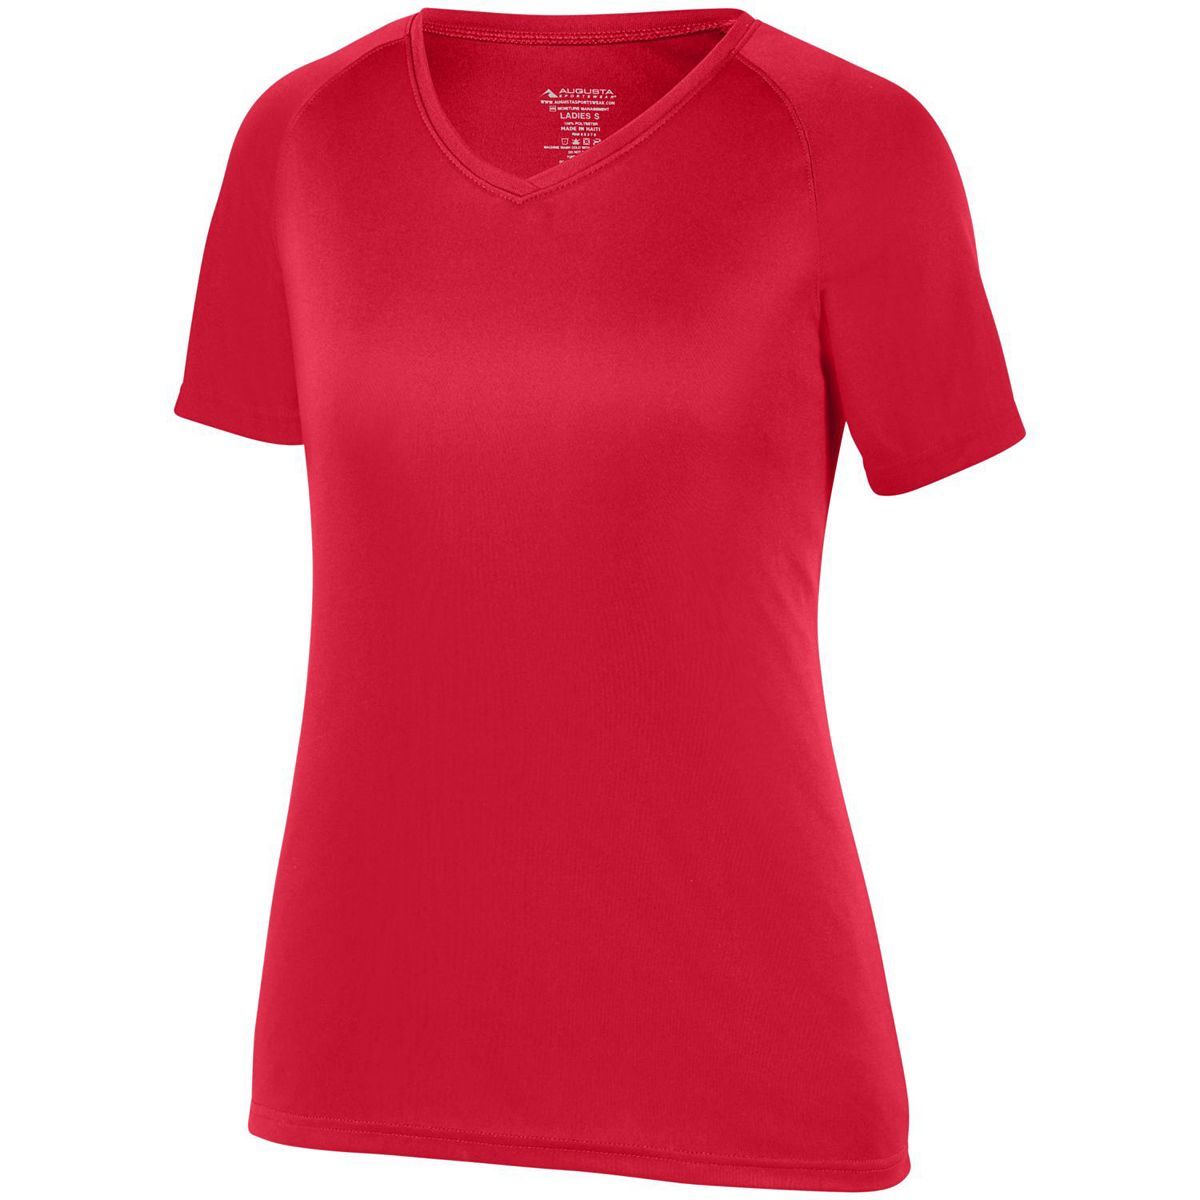 Augusta Sportswear Girls Attain Wicking Raglan Sleeve Tee in Red  -Part of the Girls, T-Shirts, Augusta-Products, Girls-Tee-Shirt, Shirts product lines at KanaleyCreations.com